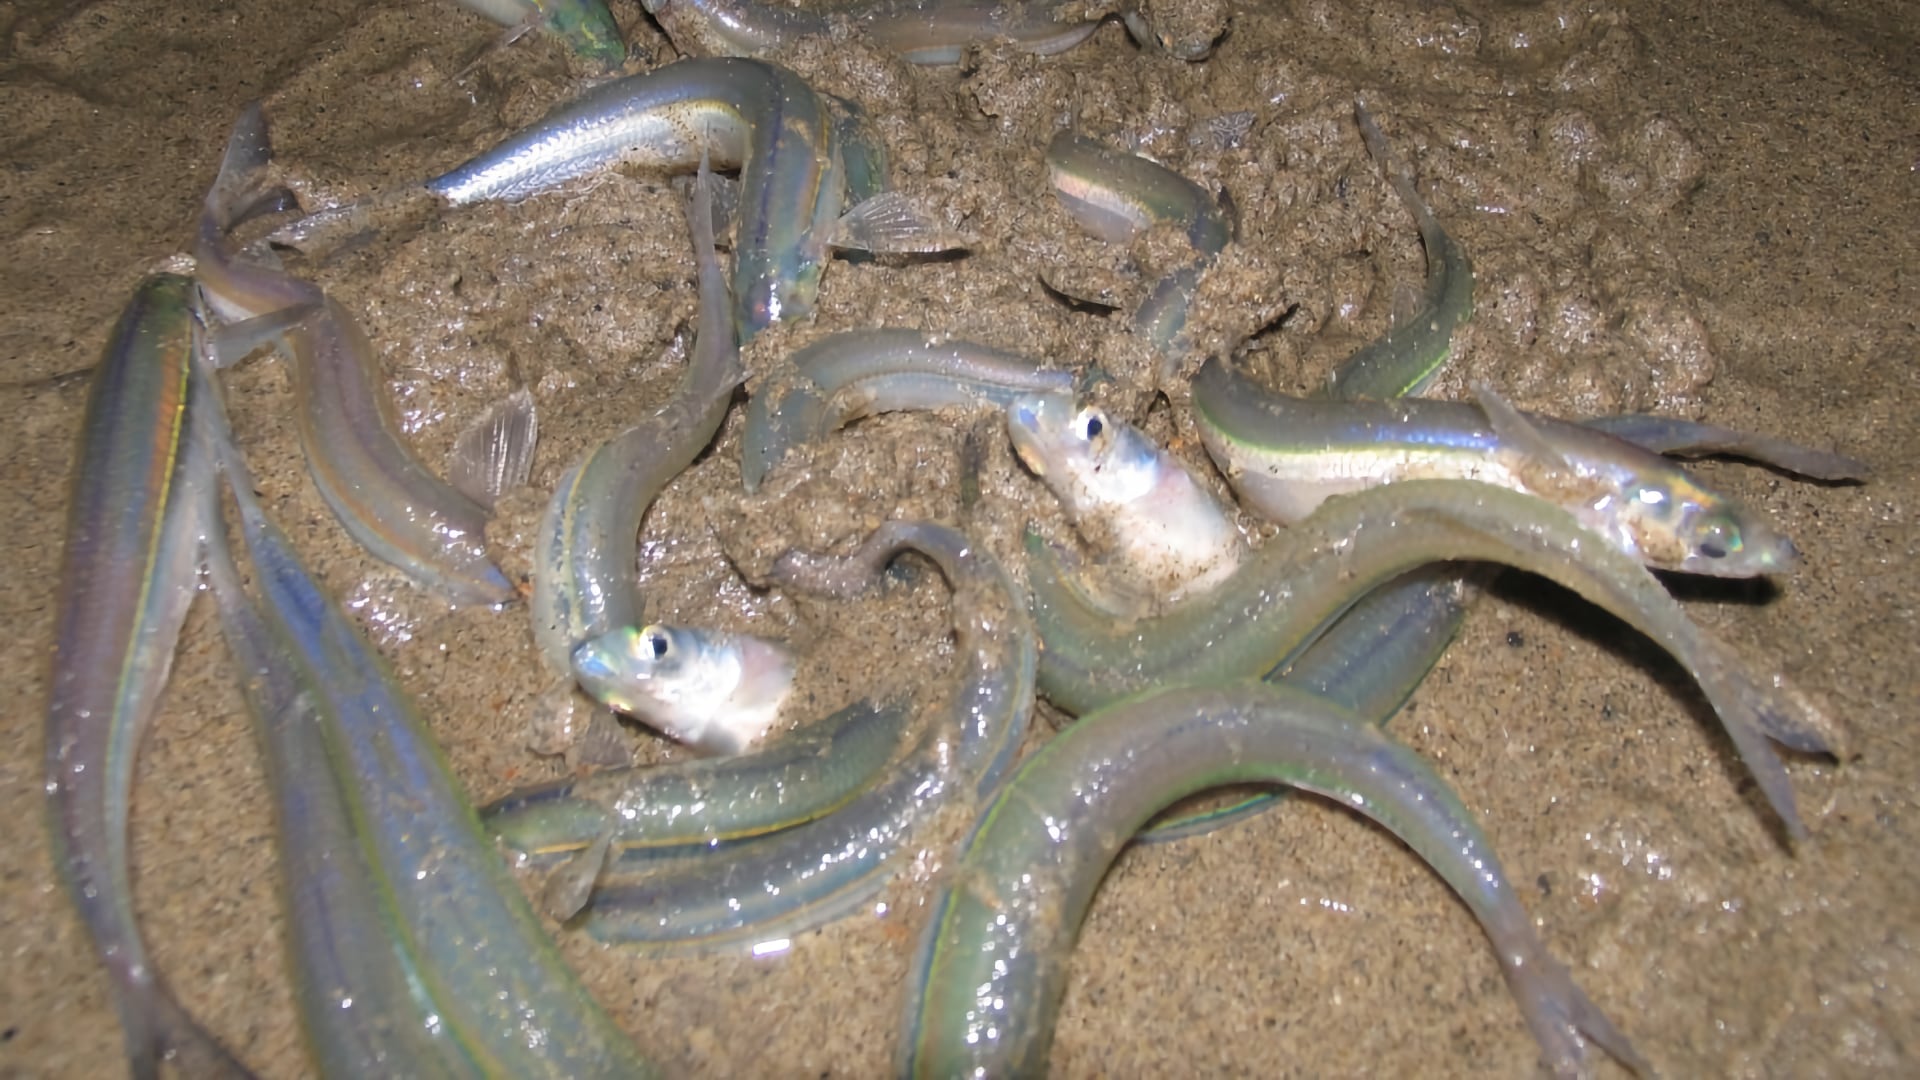 Image of grunion spawning on the beach. Image credit: Julianne Steers, Grunion.org, with written permission